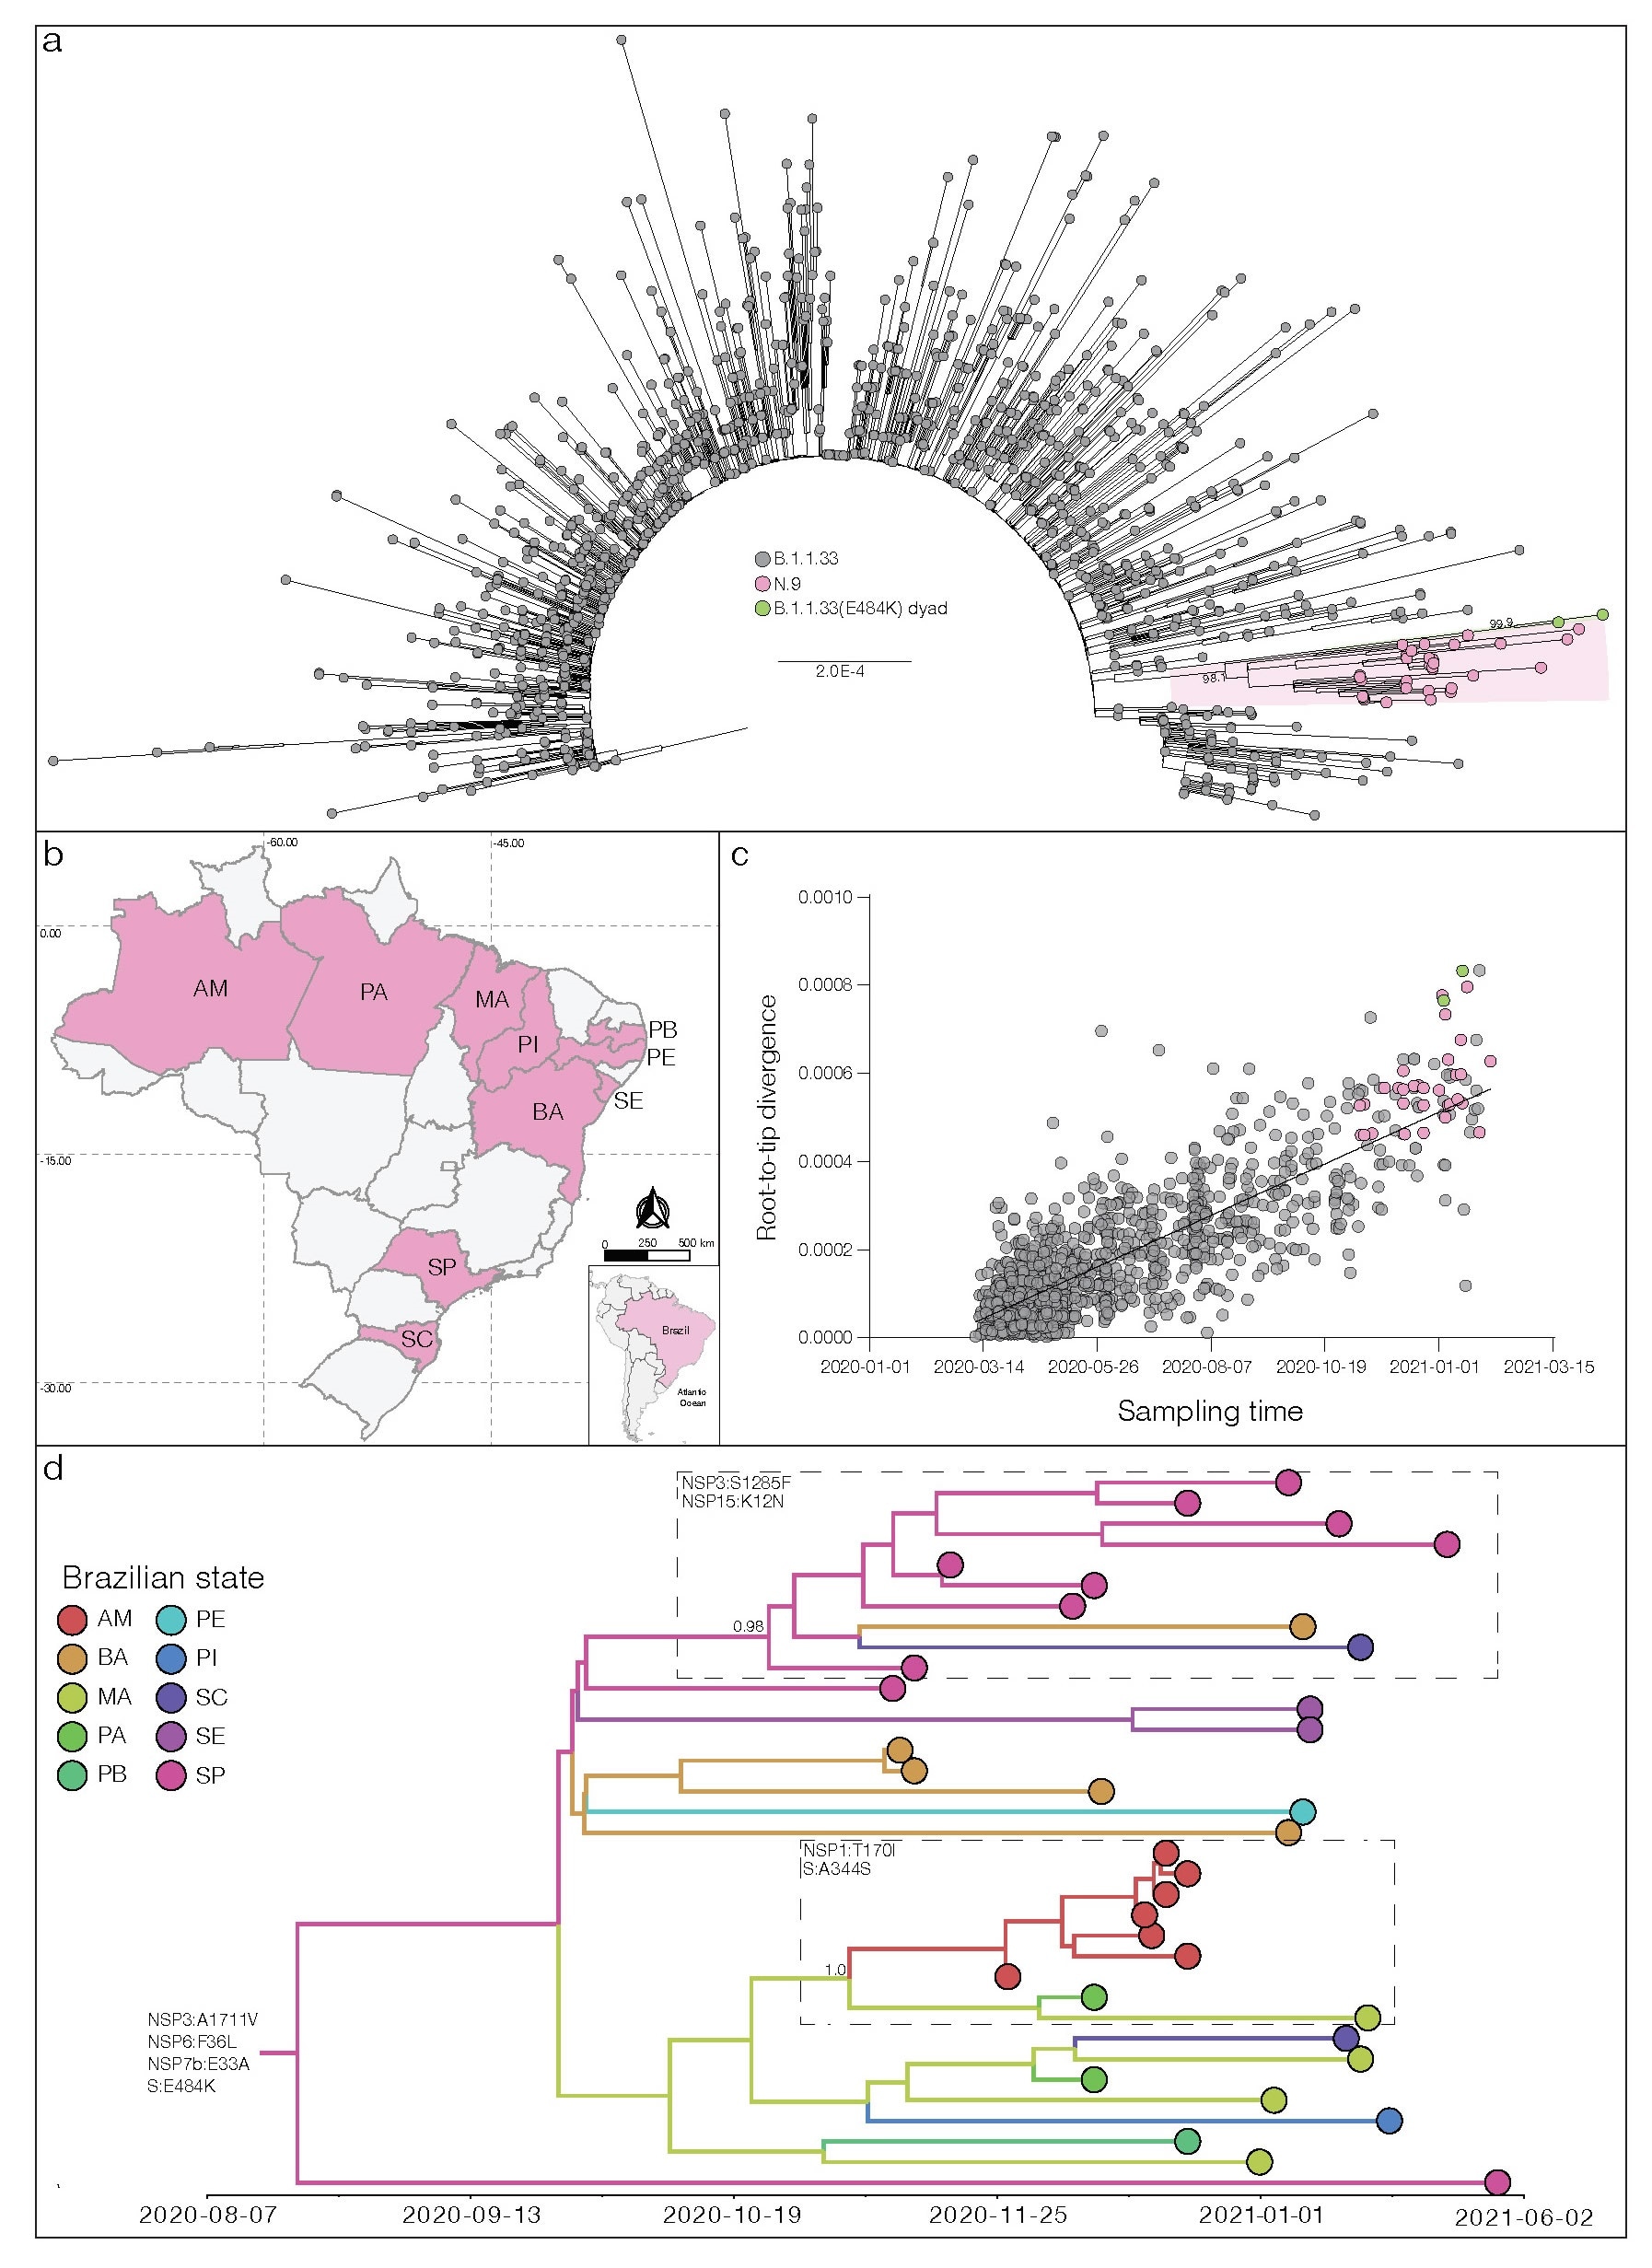 a) Maximum likelihood (ML) phylogenetic tree of the B.1.1.33 whole-genome sequences from Brazil. The B.1.1.33 sequences with mutation S:E484K are represented by pink (VOI N.9) and green [B.1.1.33(E484K)] circles. VOI N.9 clade is highlighted in pink. The aLRT support values are indicated in key nodes and branch lengths are drawn to scale with the left bar indicating nucleotide substitutions per site. b) Geographic distribution of the VOI N.9 identified in Brazil. Brazilian states’ names follow the ISO 3166-2 standard. c) Correlation between the sampling date of B.1.1.33 sequences and their genetic distance from the root of the ML phylogenetic tree. Colors indicate the B.1.1.33 clade as indicated in a). d) Bayesian phylogeographic analysis of N.9 lineage. Tips and branches colors indicate the sampling state and the most probable inferred location of their descendent nodes, respectively, as indicated in the legend. Branch posterior probabilities are indicated in key nodes. Boxes highlight two N.9 subclades carrying additional mutations (indicated in each box). The tree was automatically rooted under the assumption of a strict molecular clock, and all horizontal branch lengths are time-scaled.